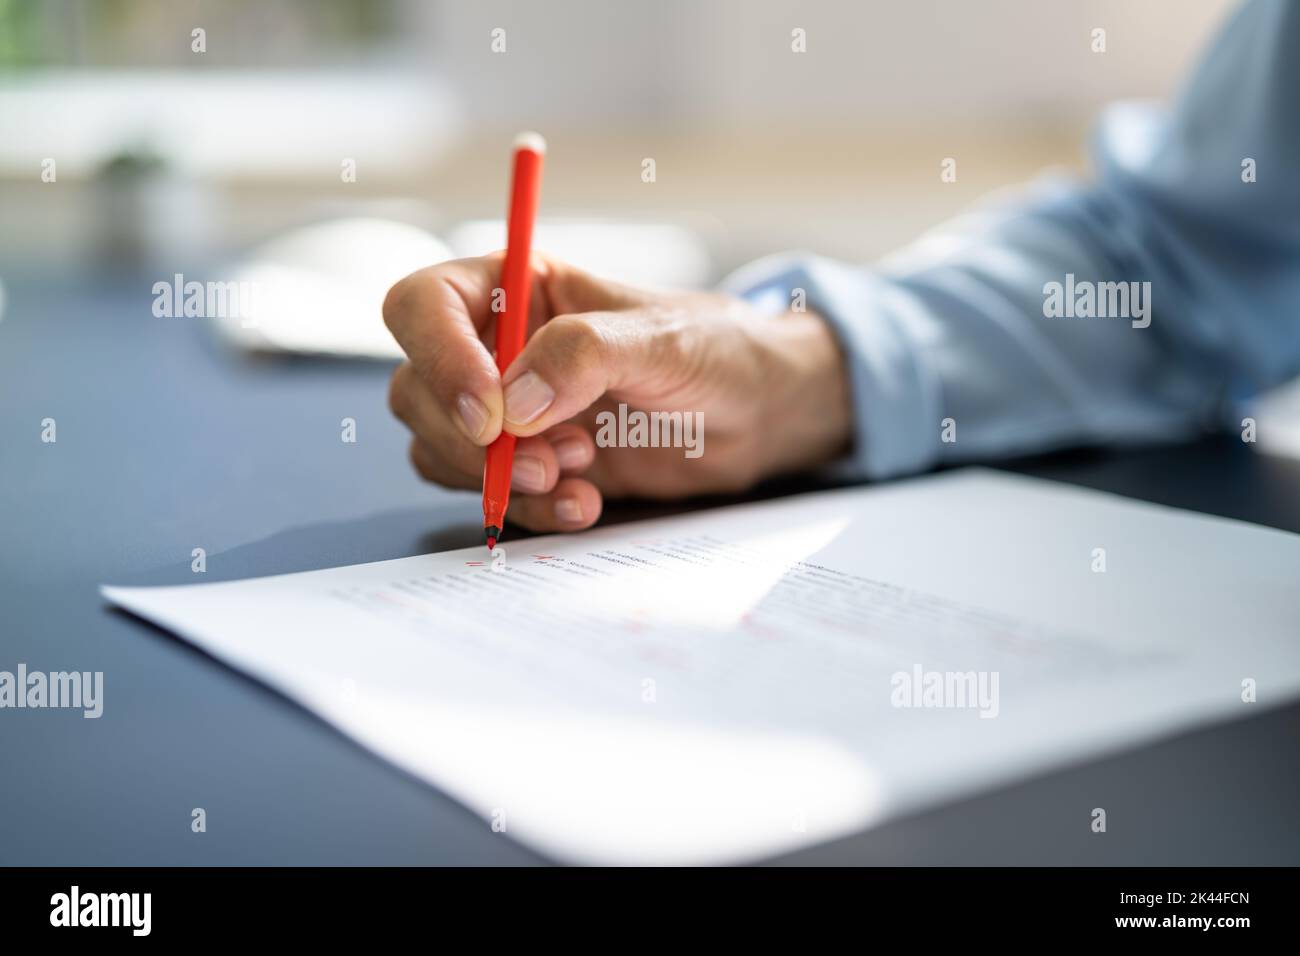 Book Script Or Text Grammar Edit And Spelling Correction Stock Photo